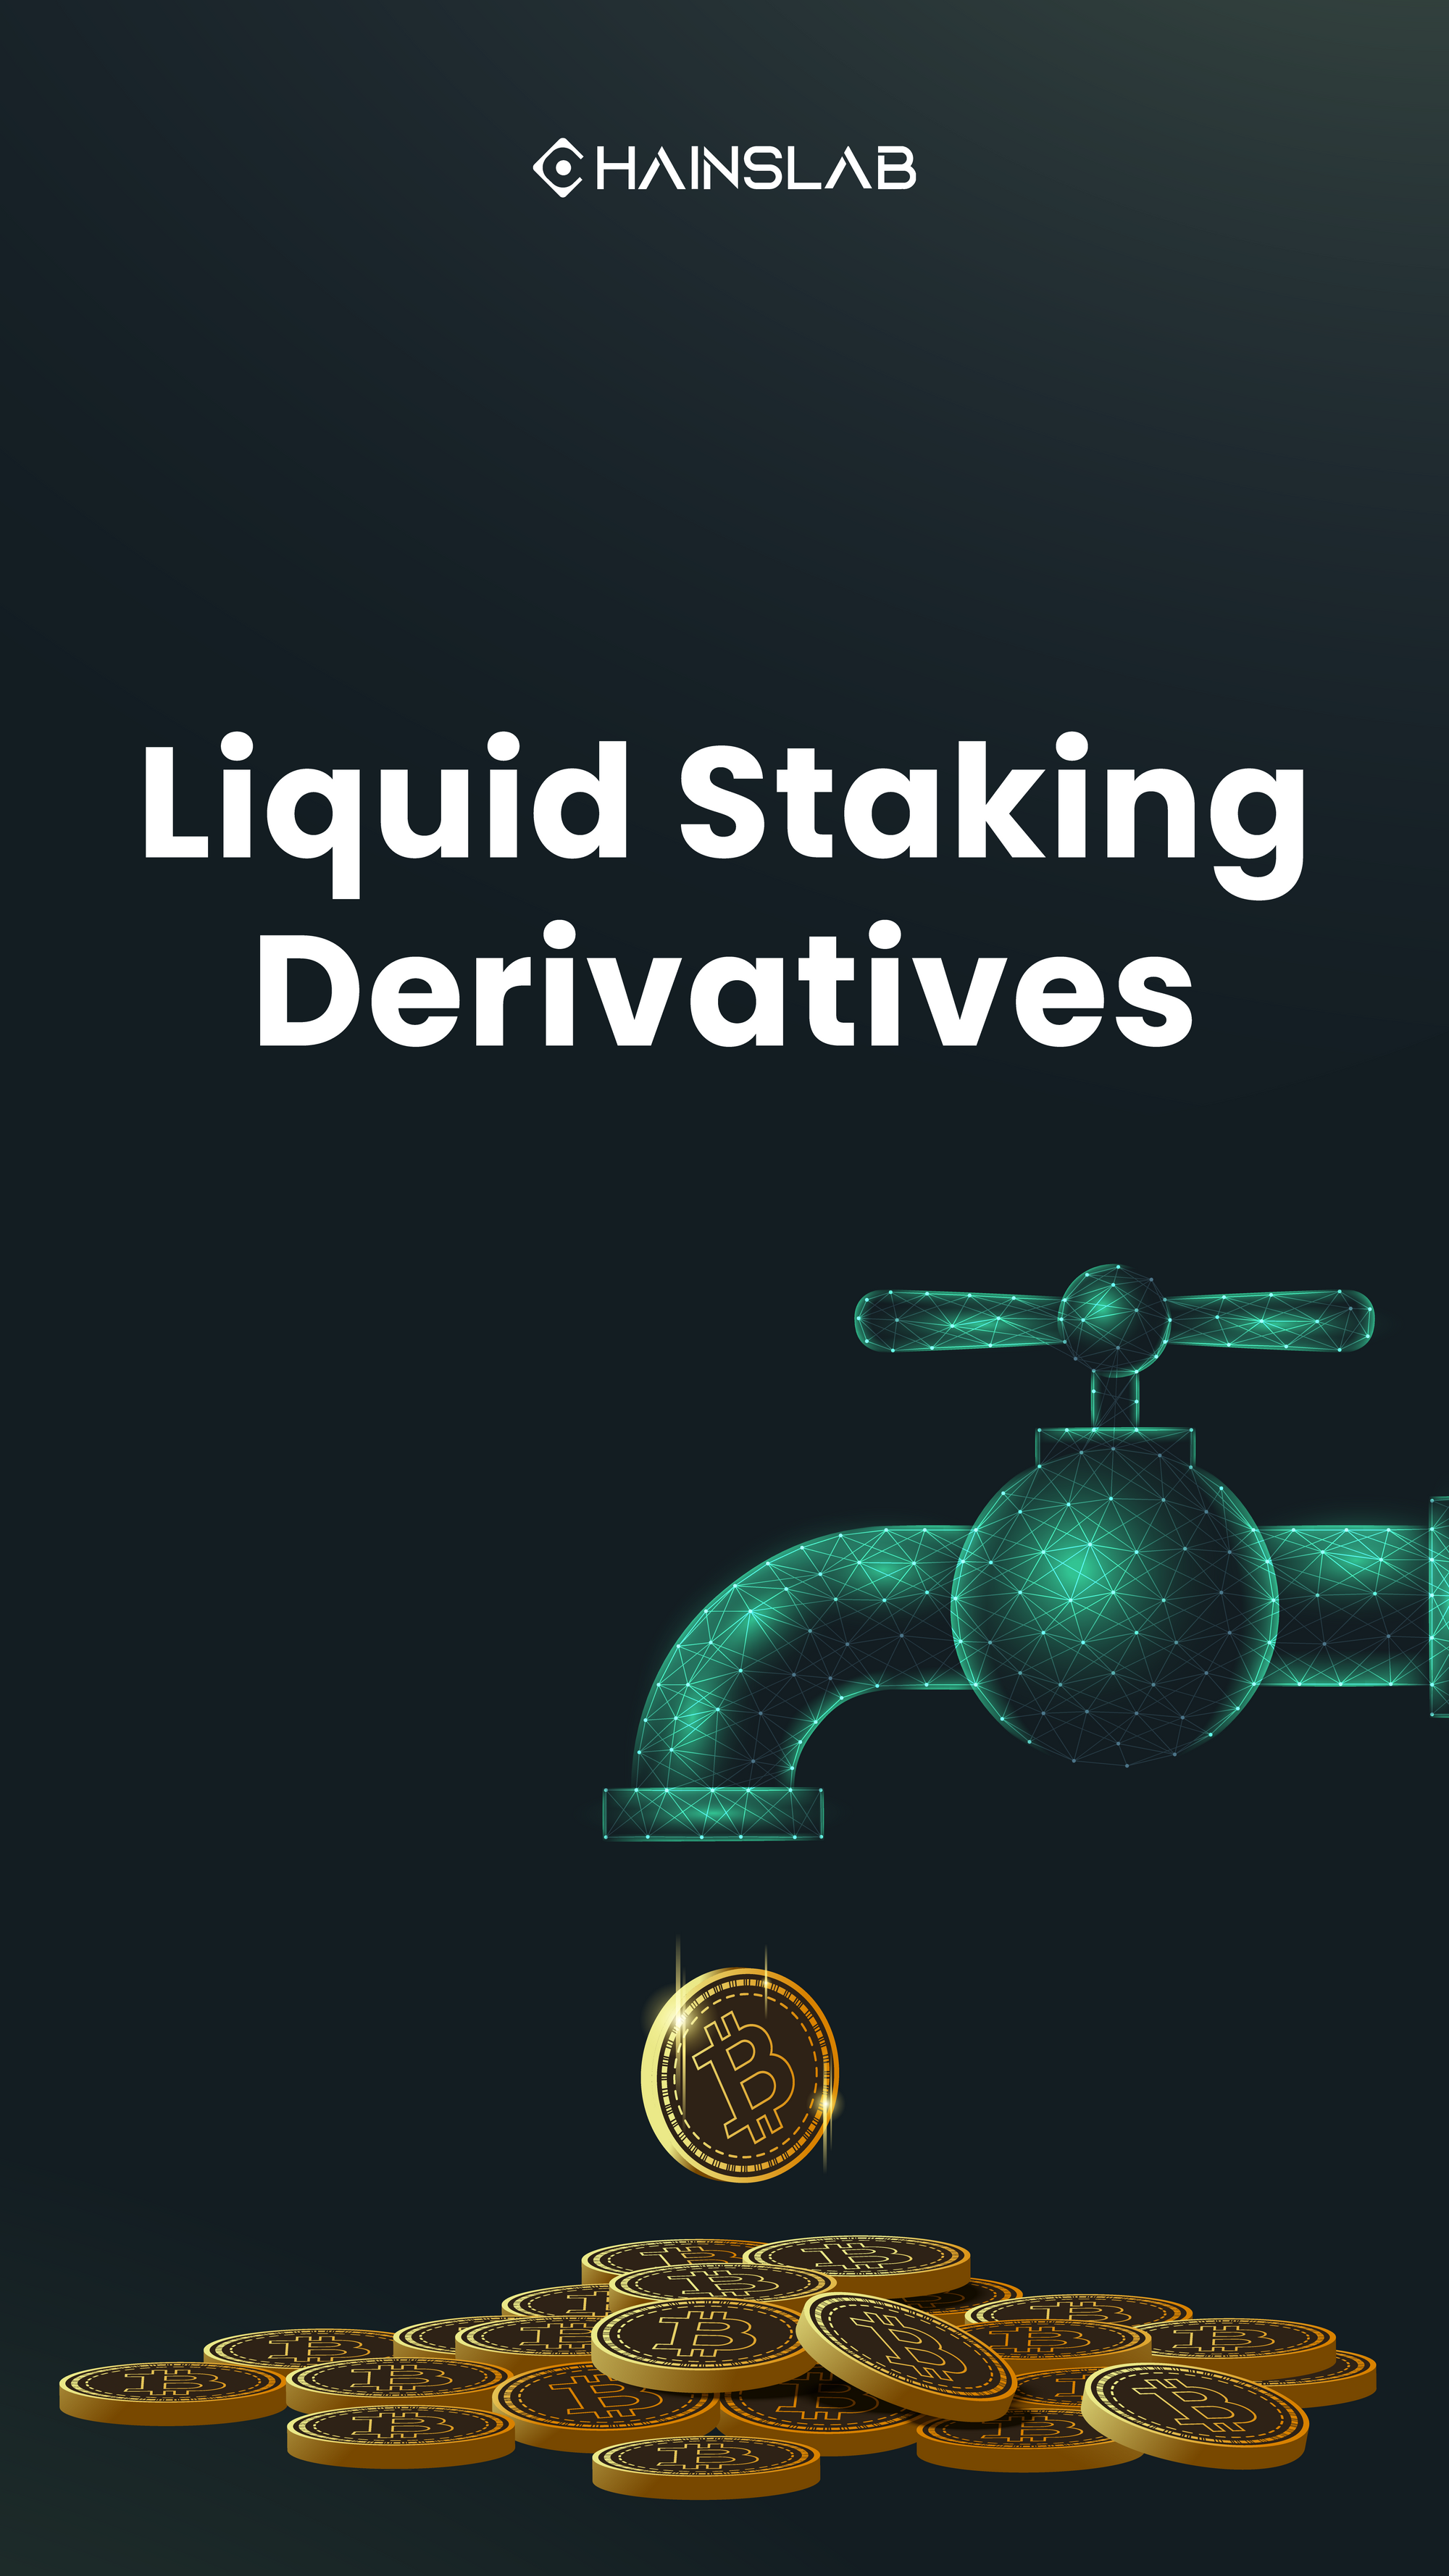 What Are Ethereum Liquid Staking Derivatives?